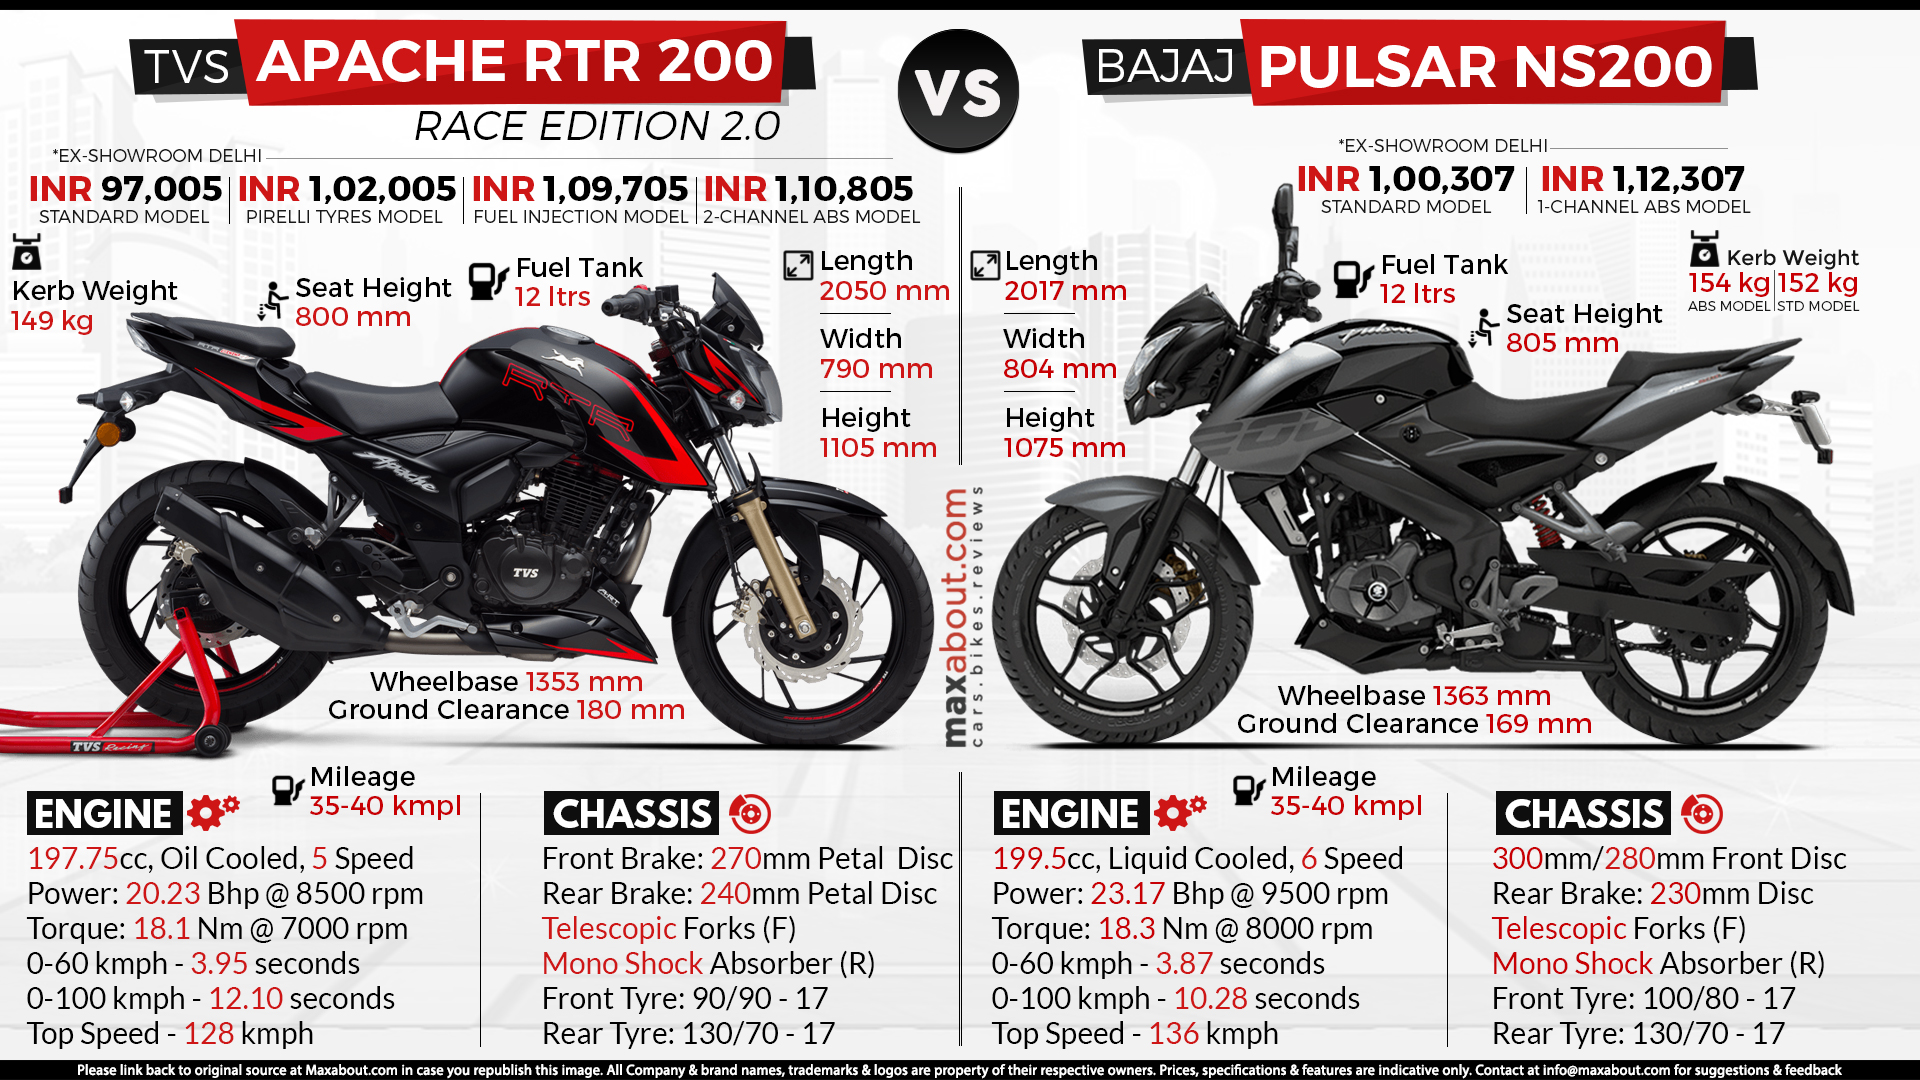 tvs apache rtr 200 4v race edition 2.0 seat height